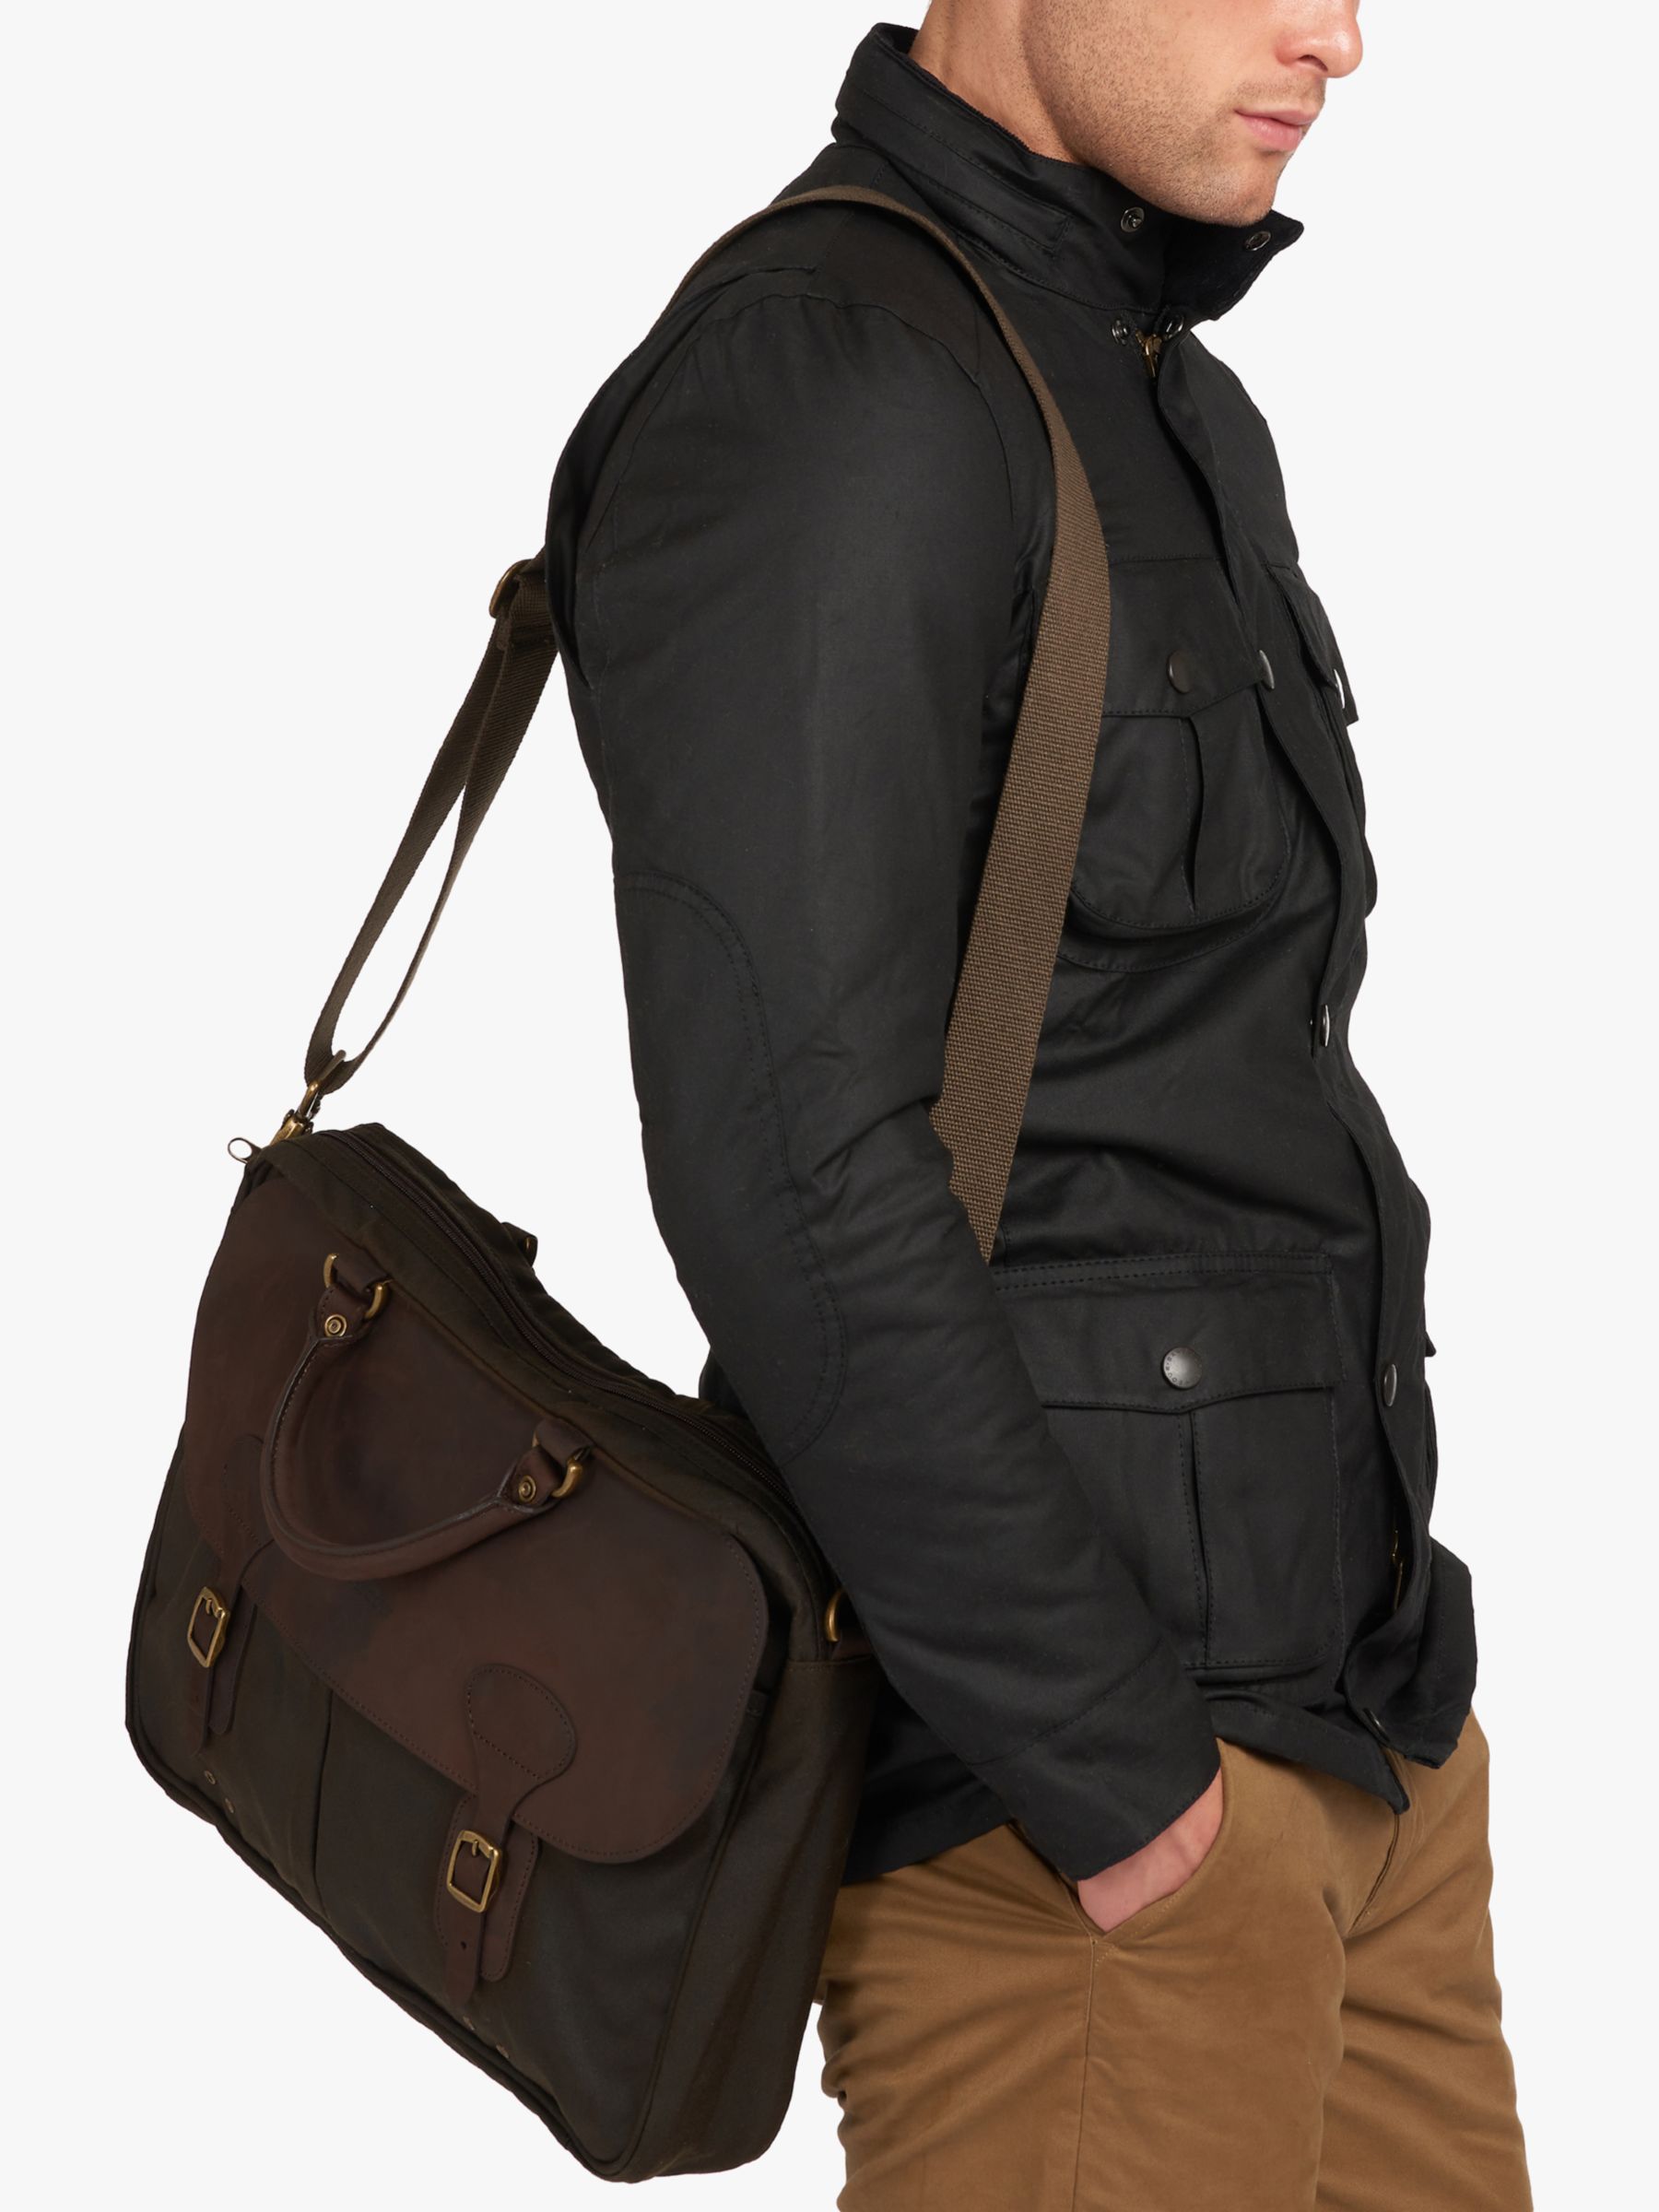 Buy Barbour Wax Cotton and Leather Trim Satchel | John Lewis